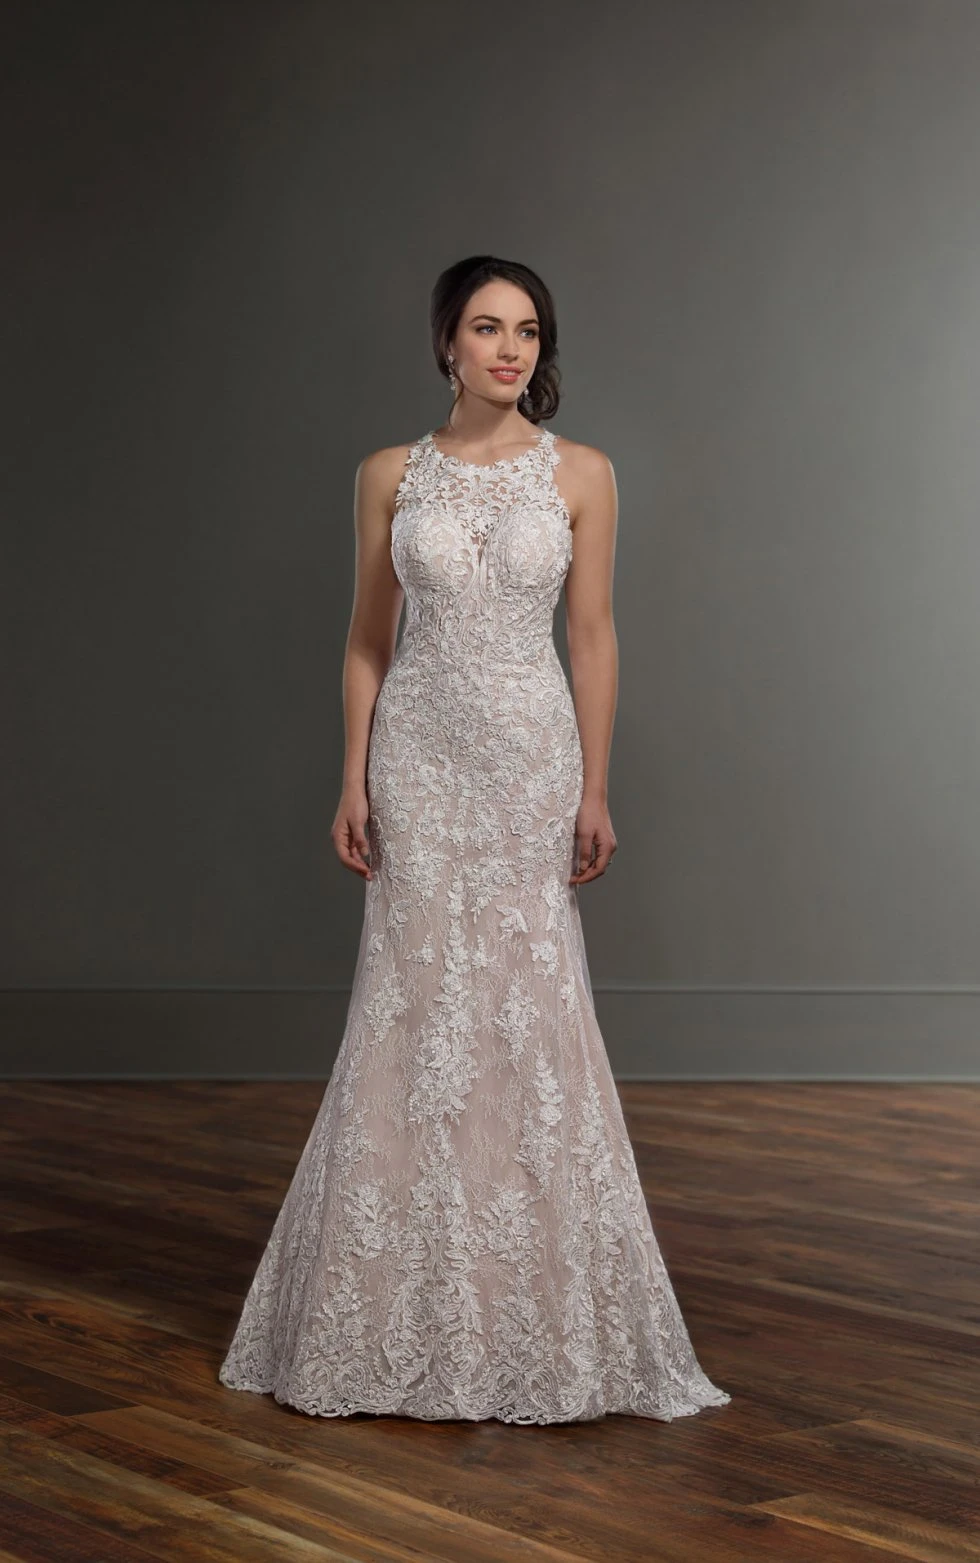 Lace Wedding Dresses Lace High Neck Wedding Gown